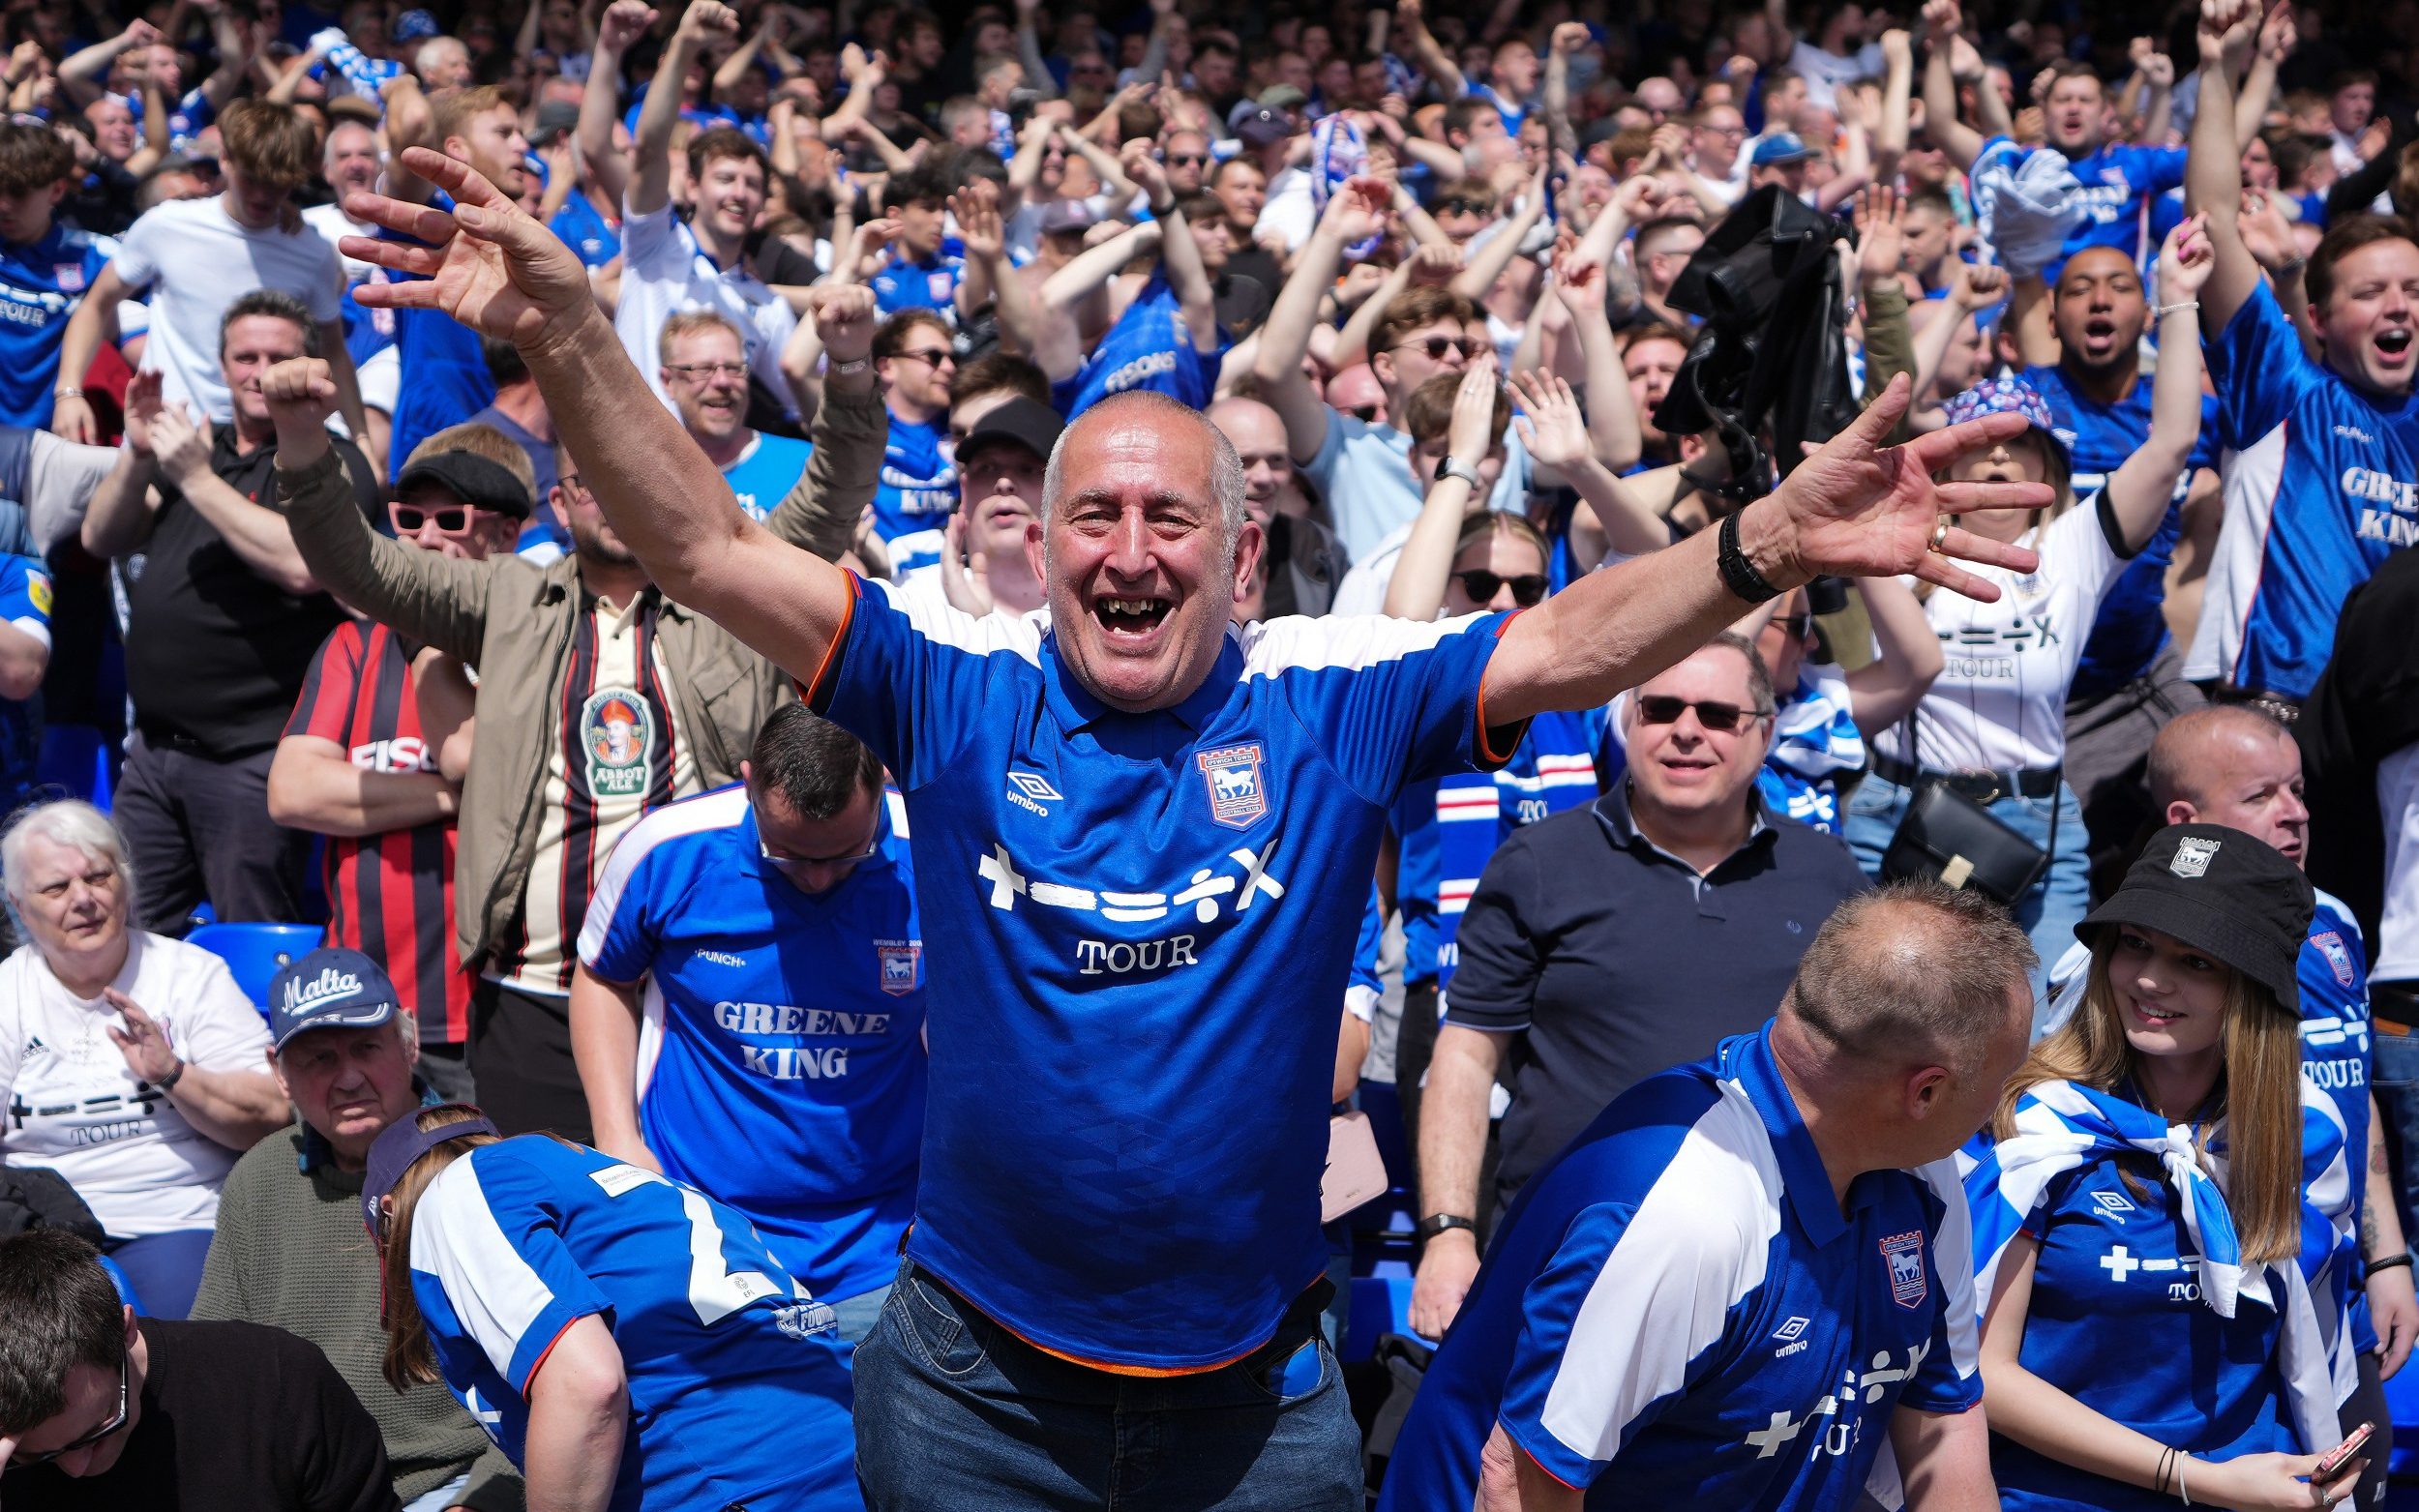 ipswich town fans invade pitch after winning promotion back to premier league